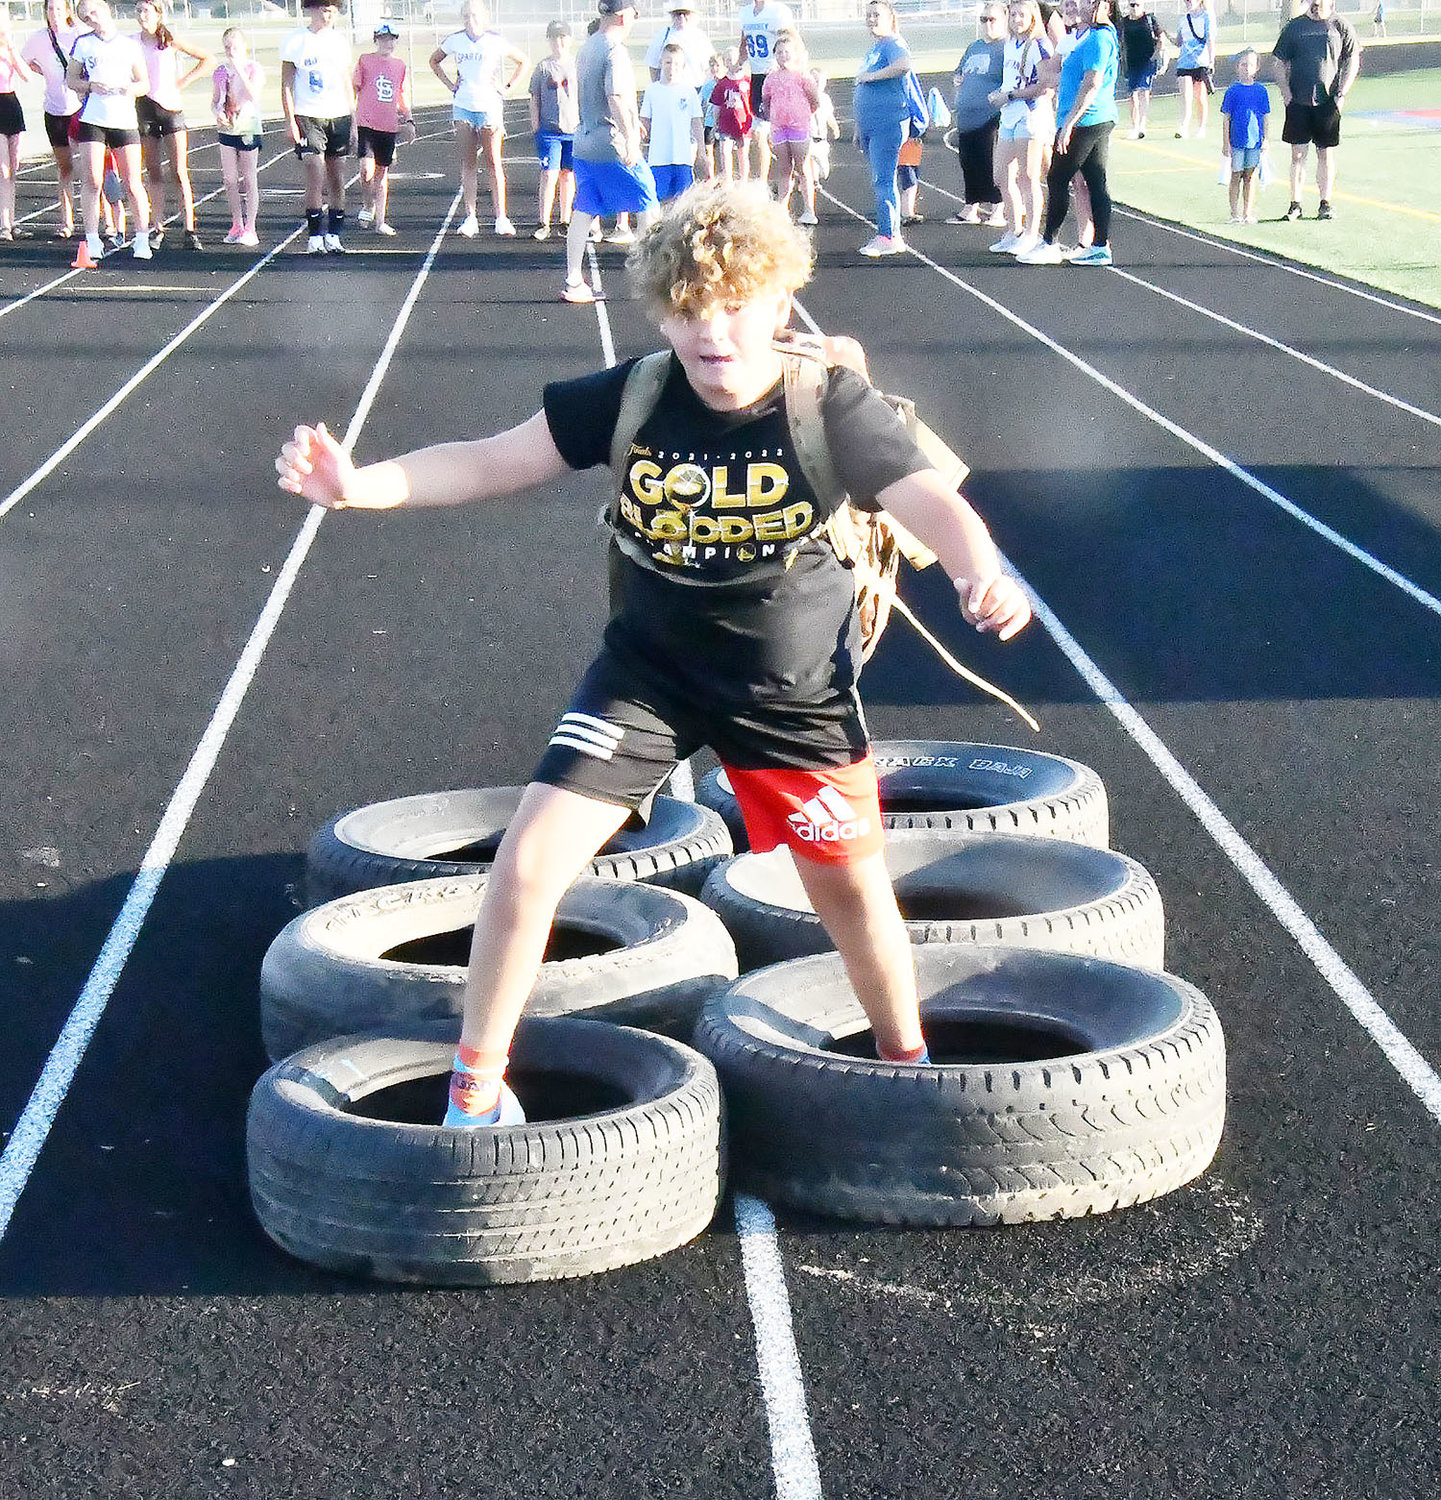 Jackson Link runs through tires during the JROTC obstacle course competition. Link is a student in the Moberly school district.